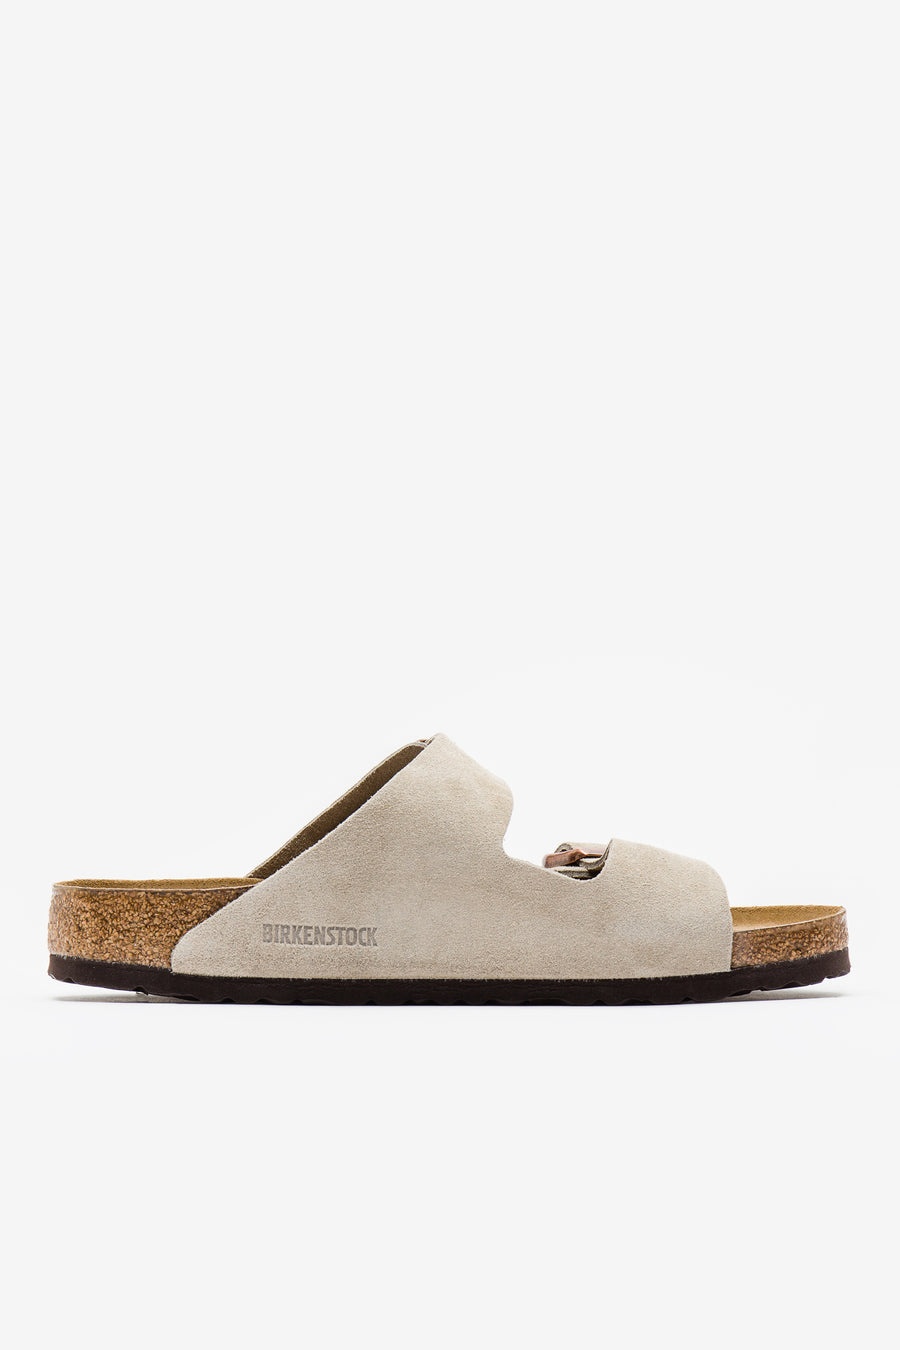 Arizona Soft Footbed Sandal in Taupe - 4